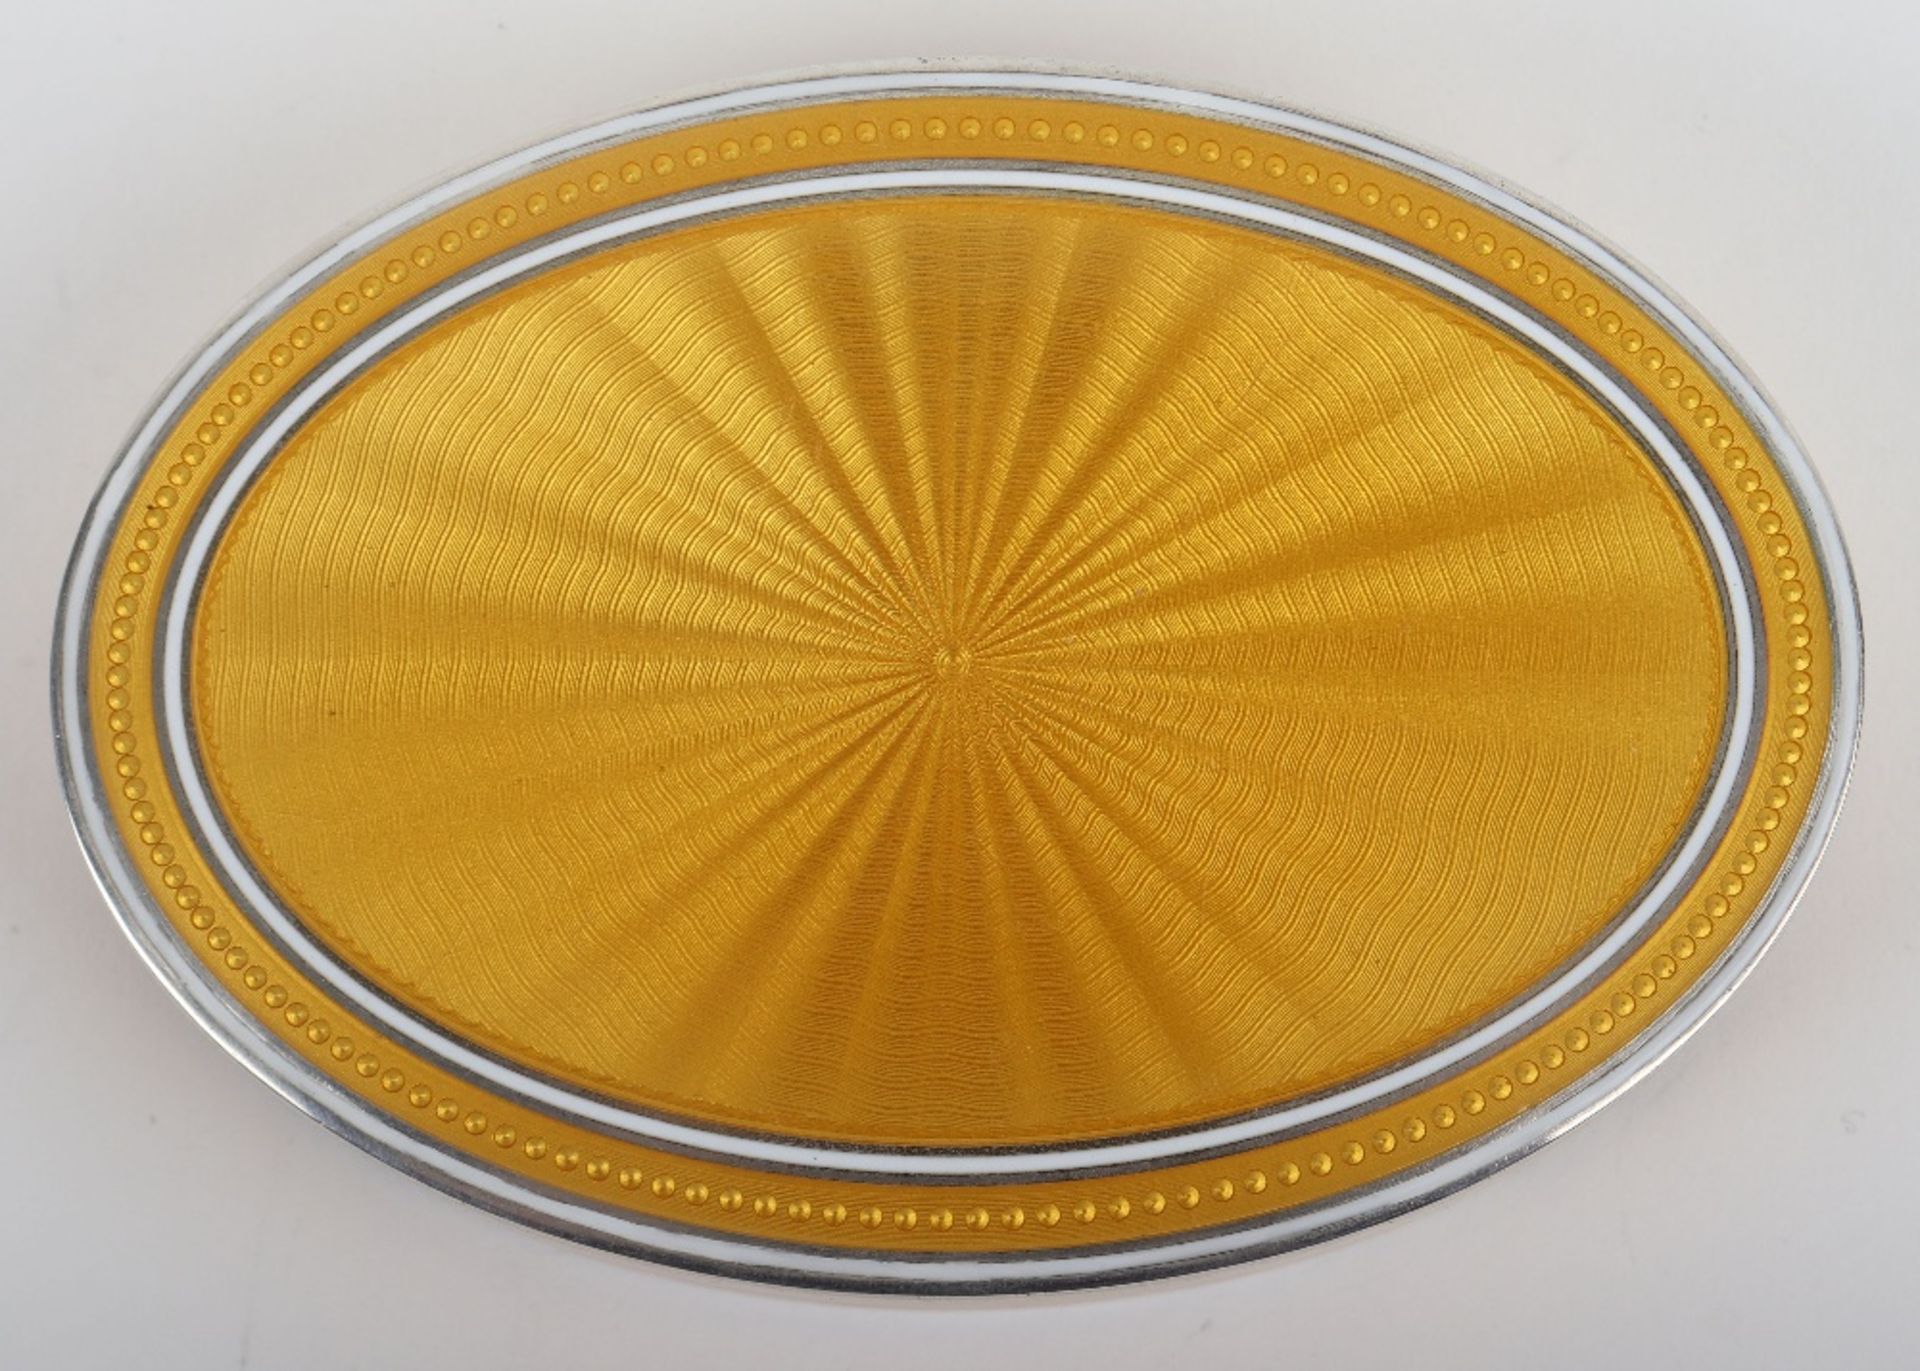 A fine silver and guilloche yellow enamel box, import, 1912 Adolf Philip Krieger - Image 3 of 7